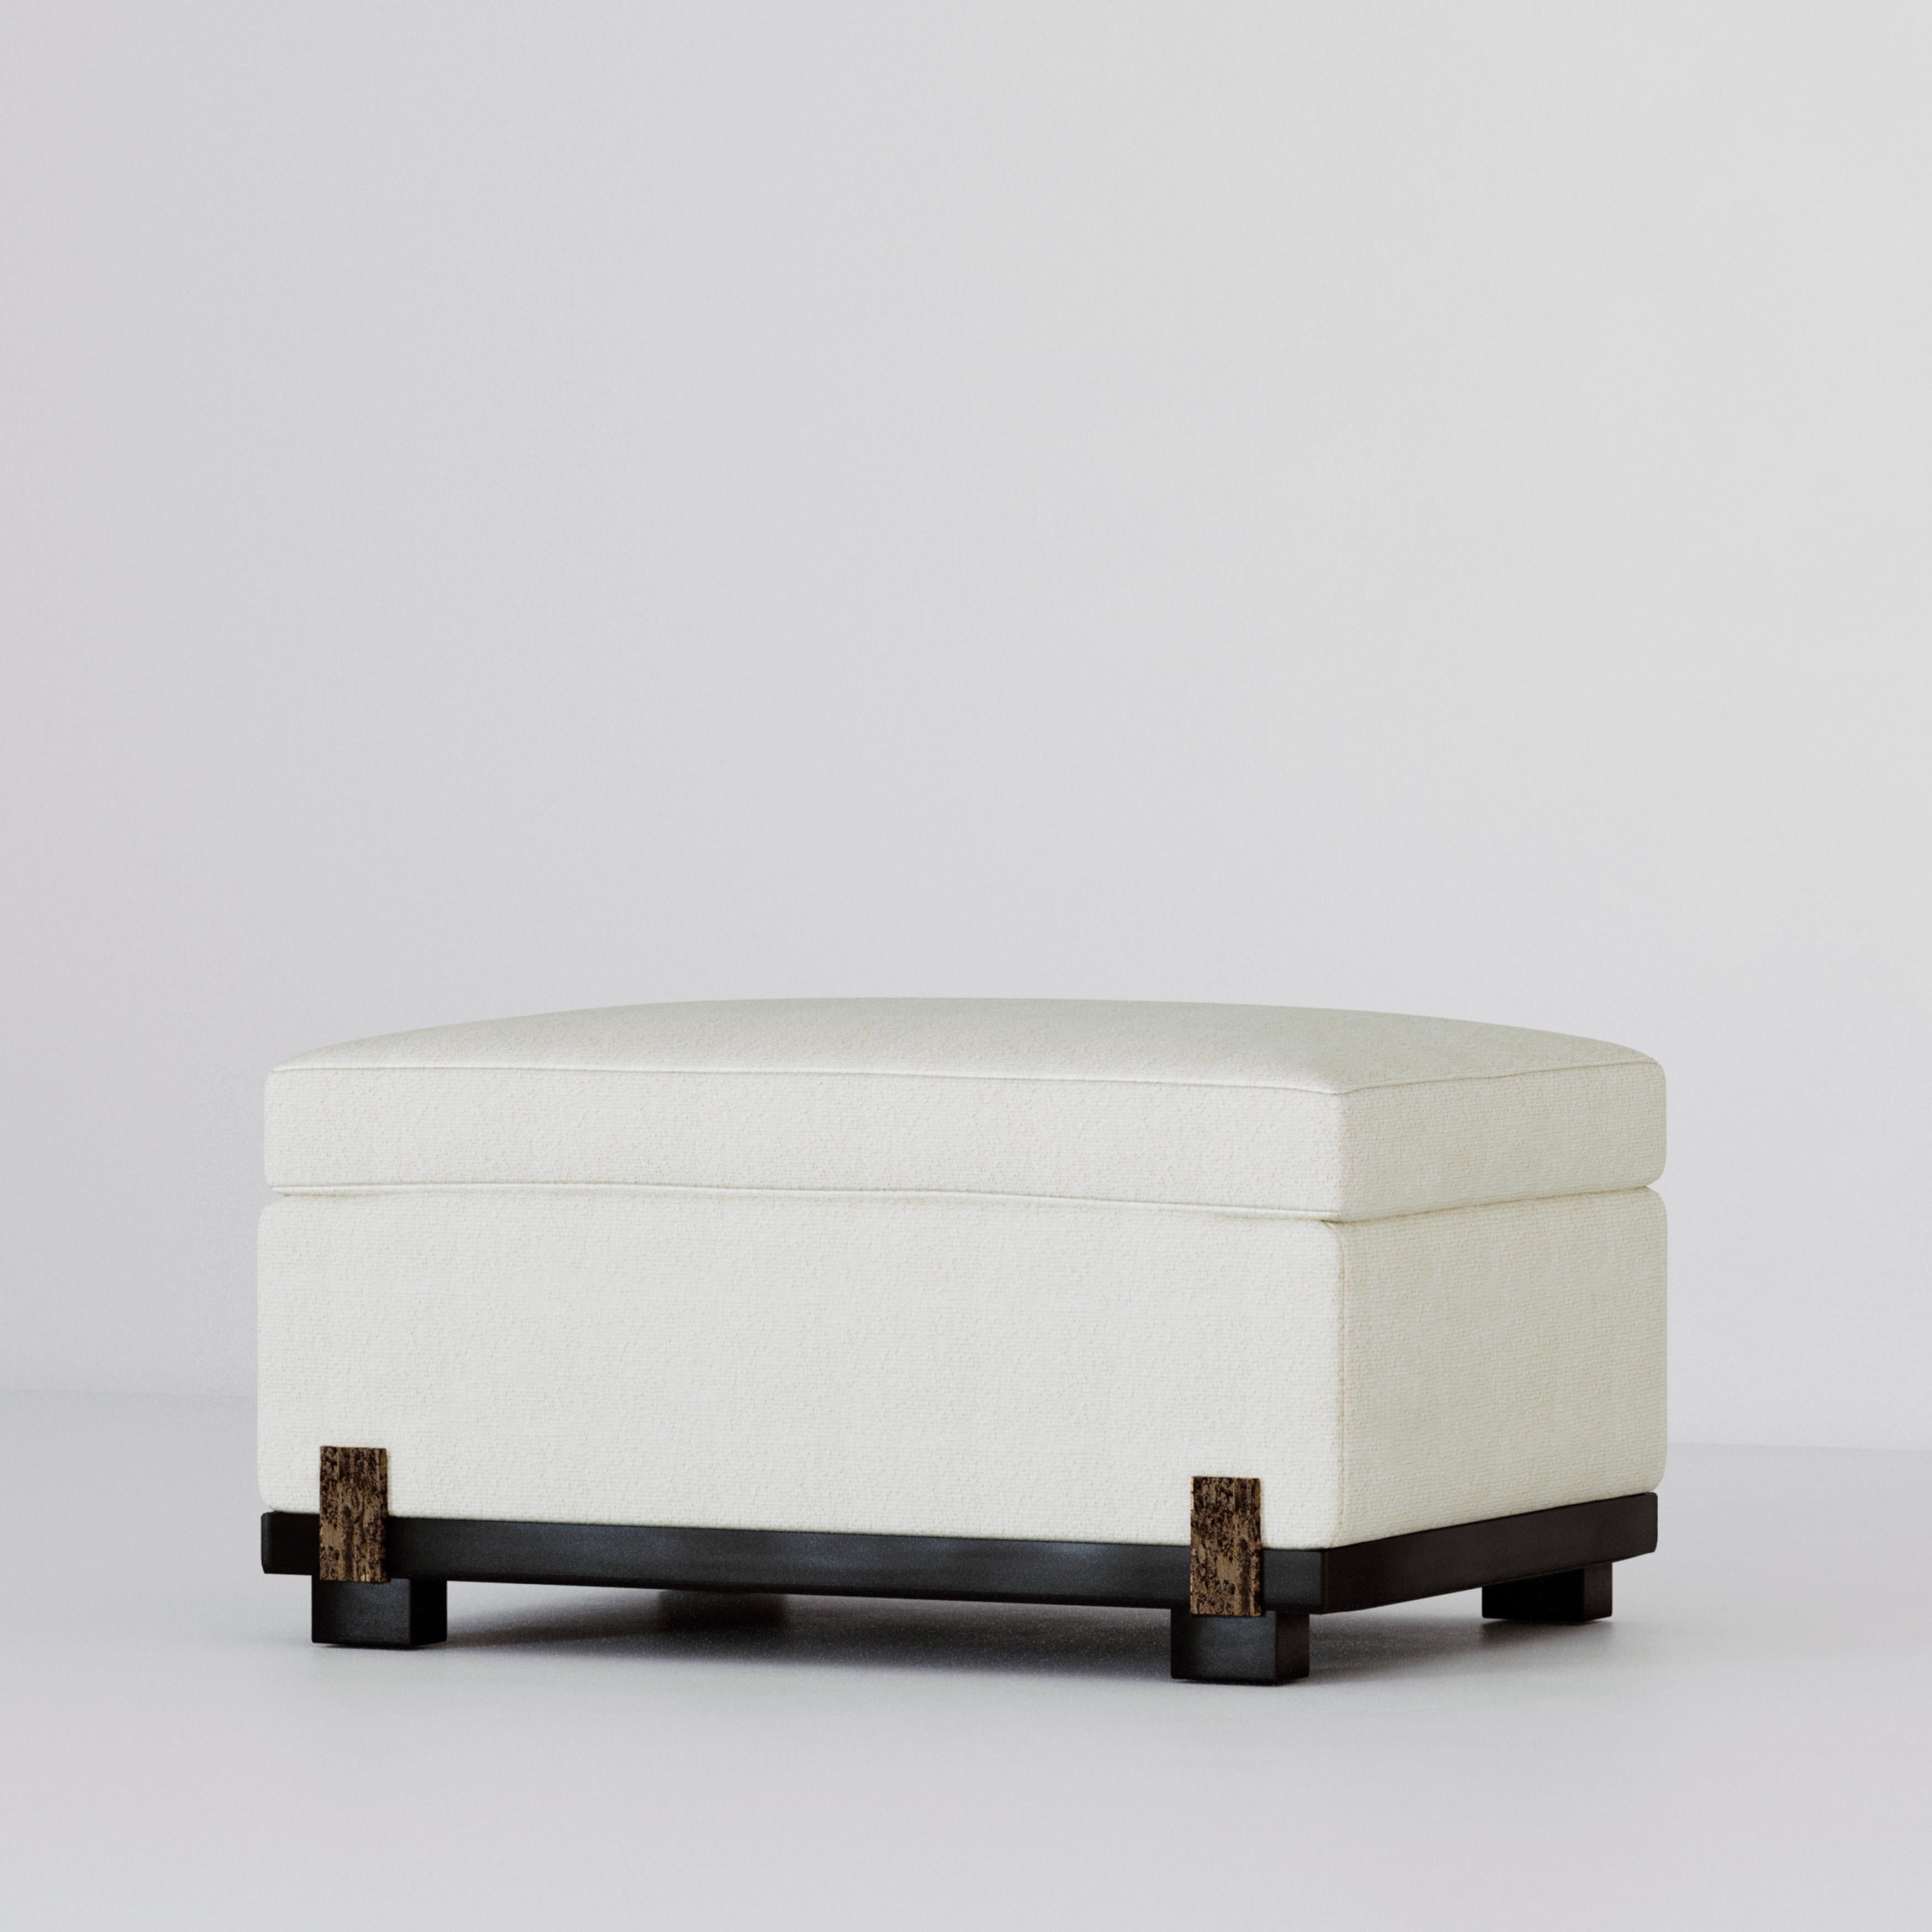 Ida Foot Stool by Duistt
Dimensions: W 75 x D 55 x H 42 cm
Materials: Duistt Fabric, Black Lacquered Sand brushed Oak, Cast Bronze Details

The Ida footstool crafted with great attention to details, is part of a luxurious collection set of two